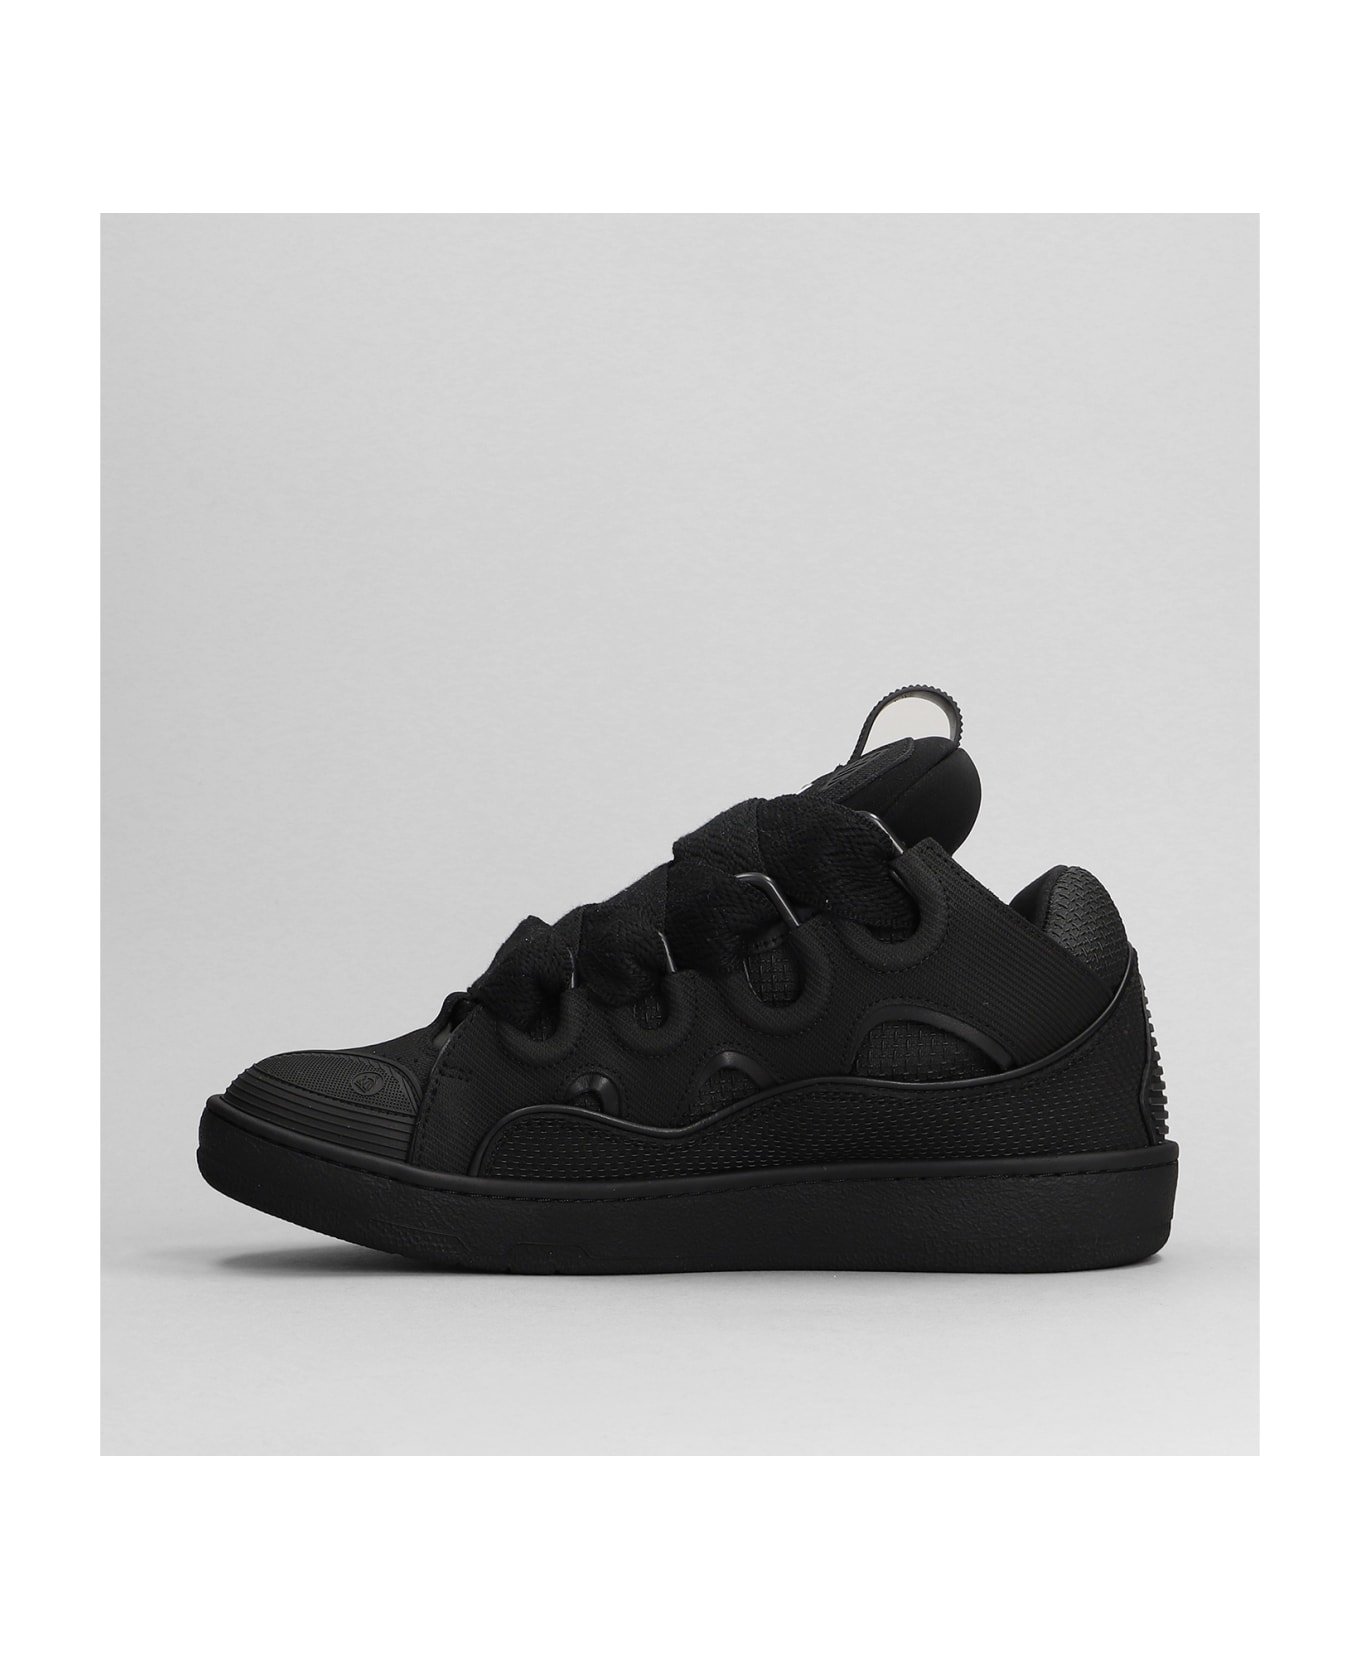 Lanvin Curb Sneakers In Black Leather - black